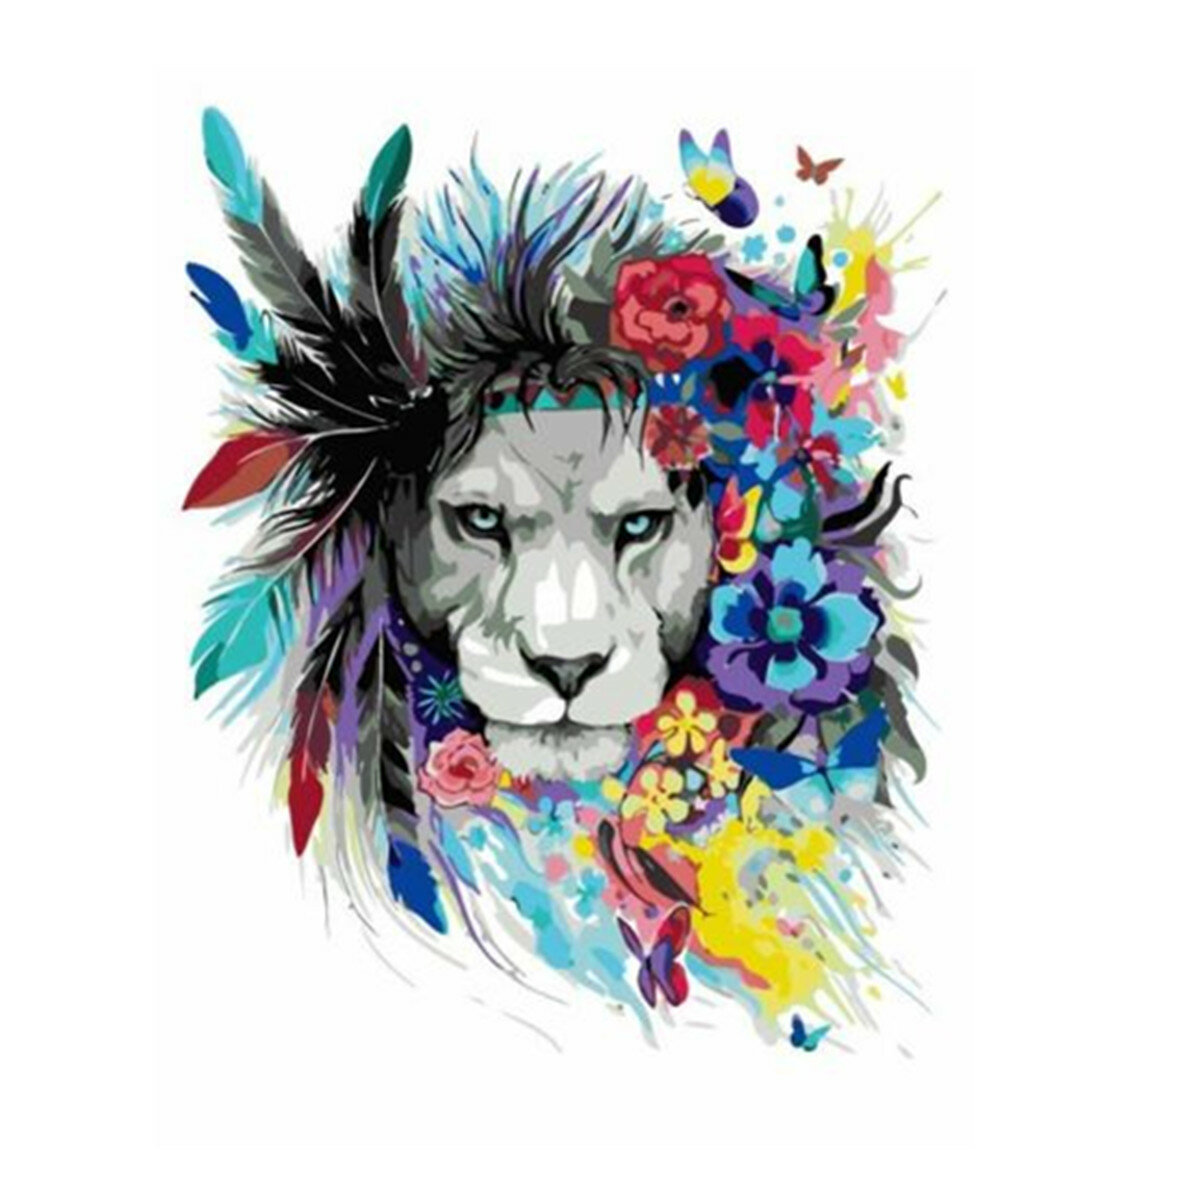 DIY Digital Painting Art Kit Lion 40*50cm Art Craft Kit Handmade Wall Decorations Gifts with Wooden 